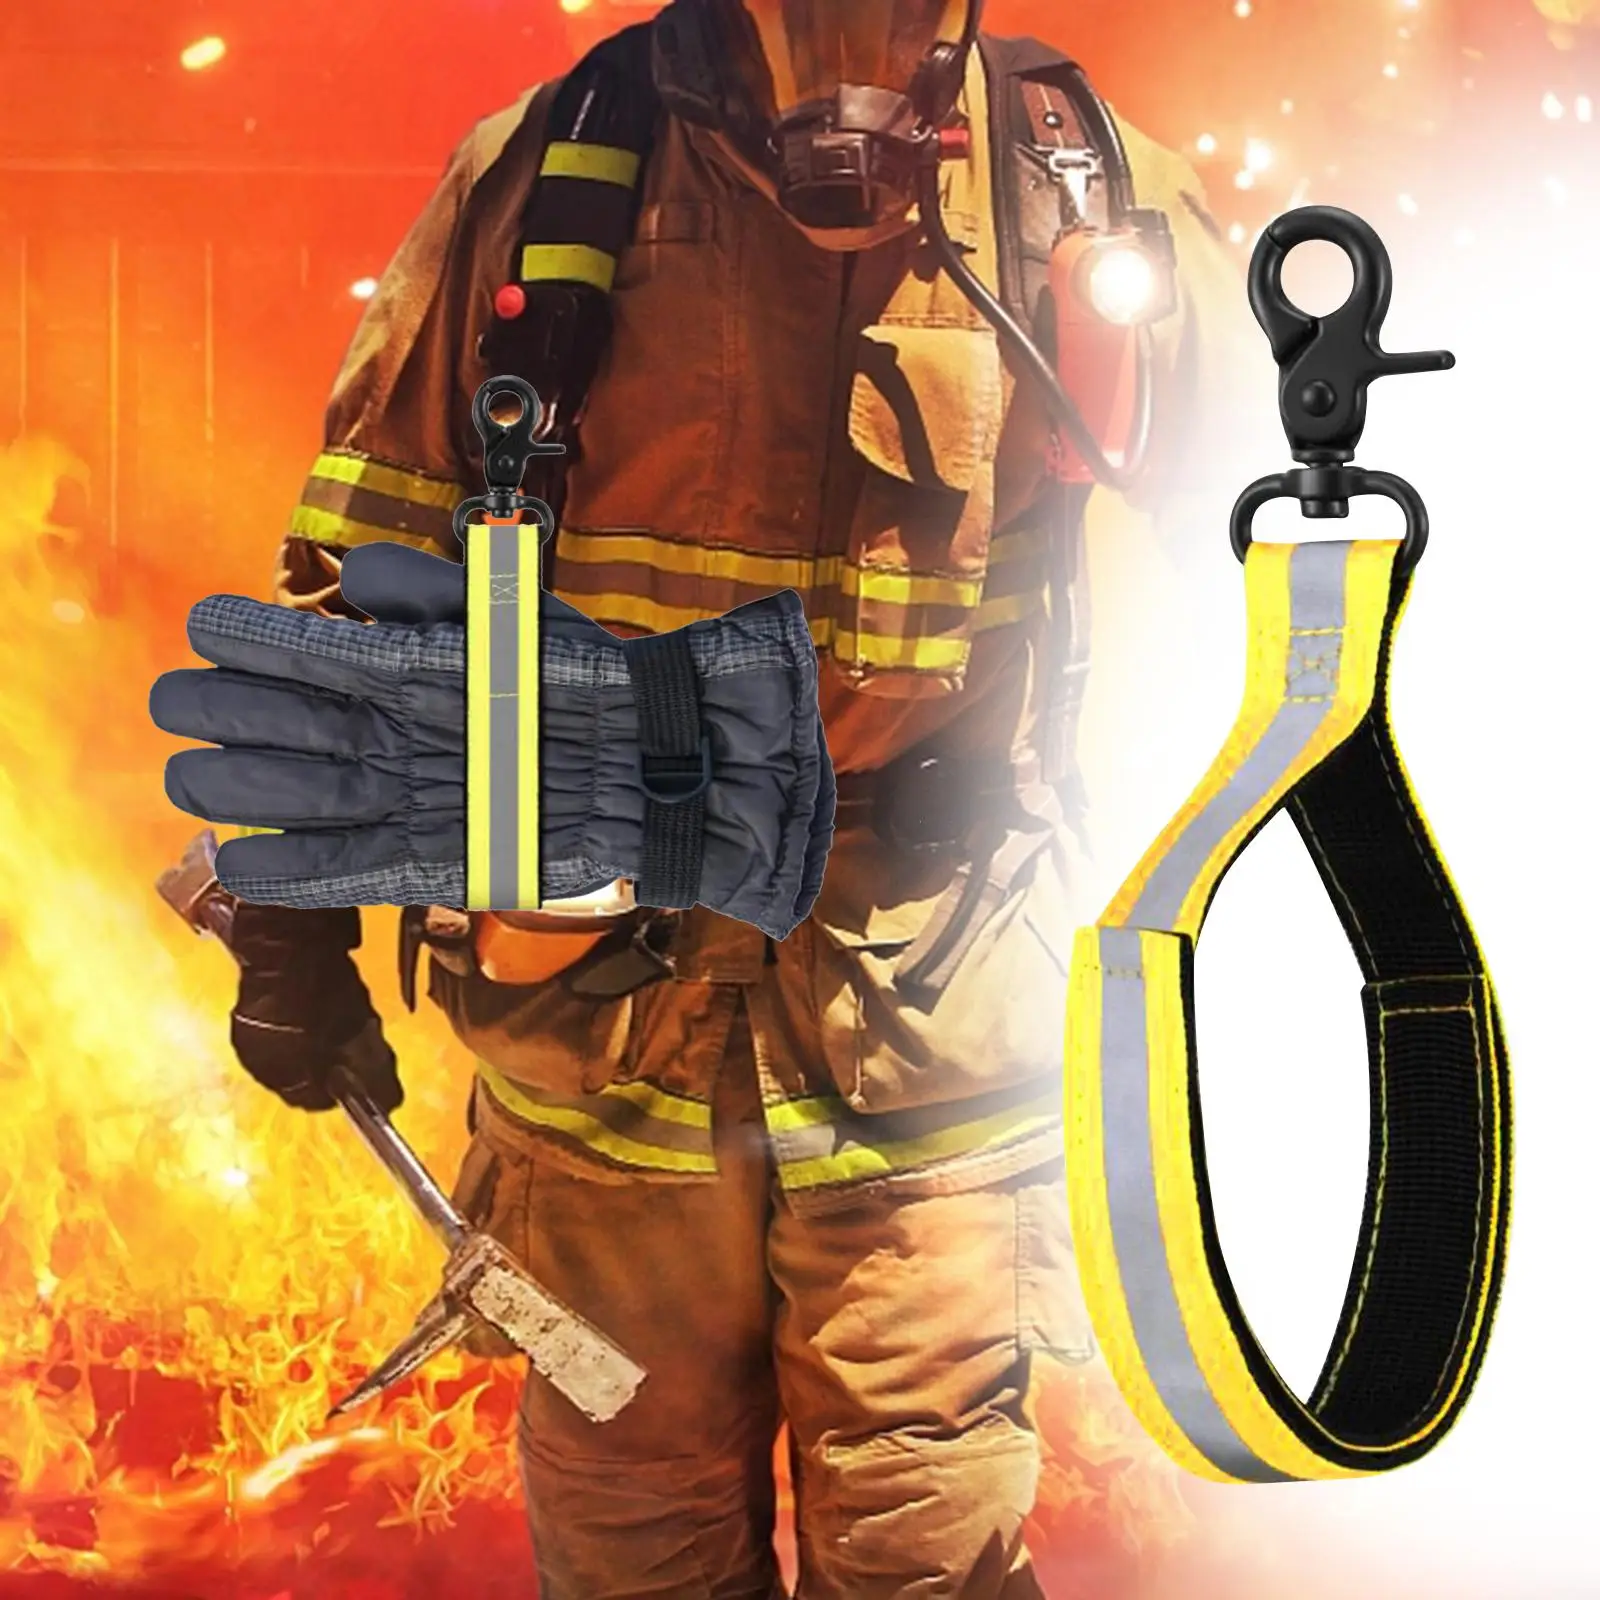 Firefighter Glove Strap Fireman Turnout Gear Nylon Lightweight Tool Firefighter Glove Holder for Cold Weather Gloves Accessories